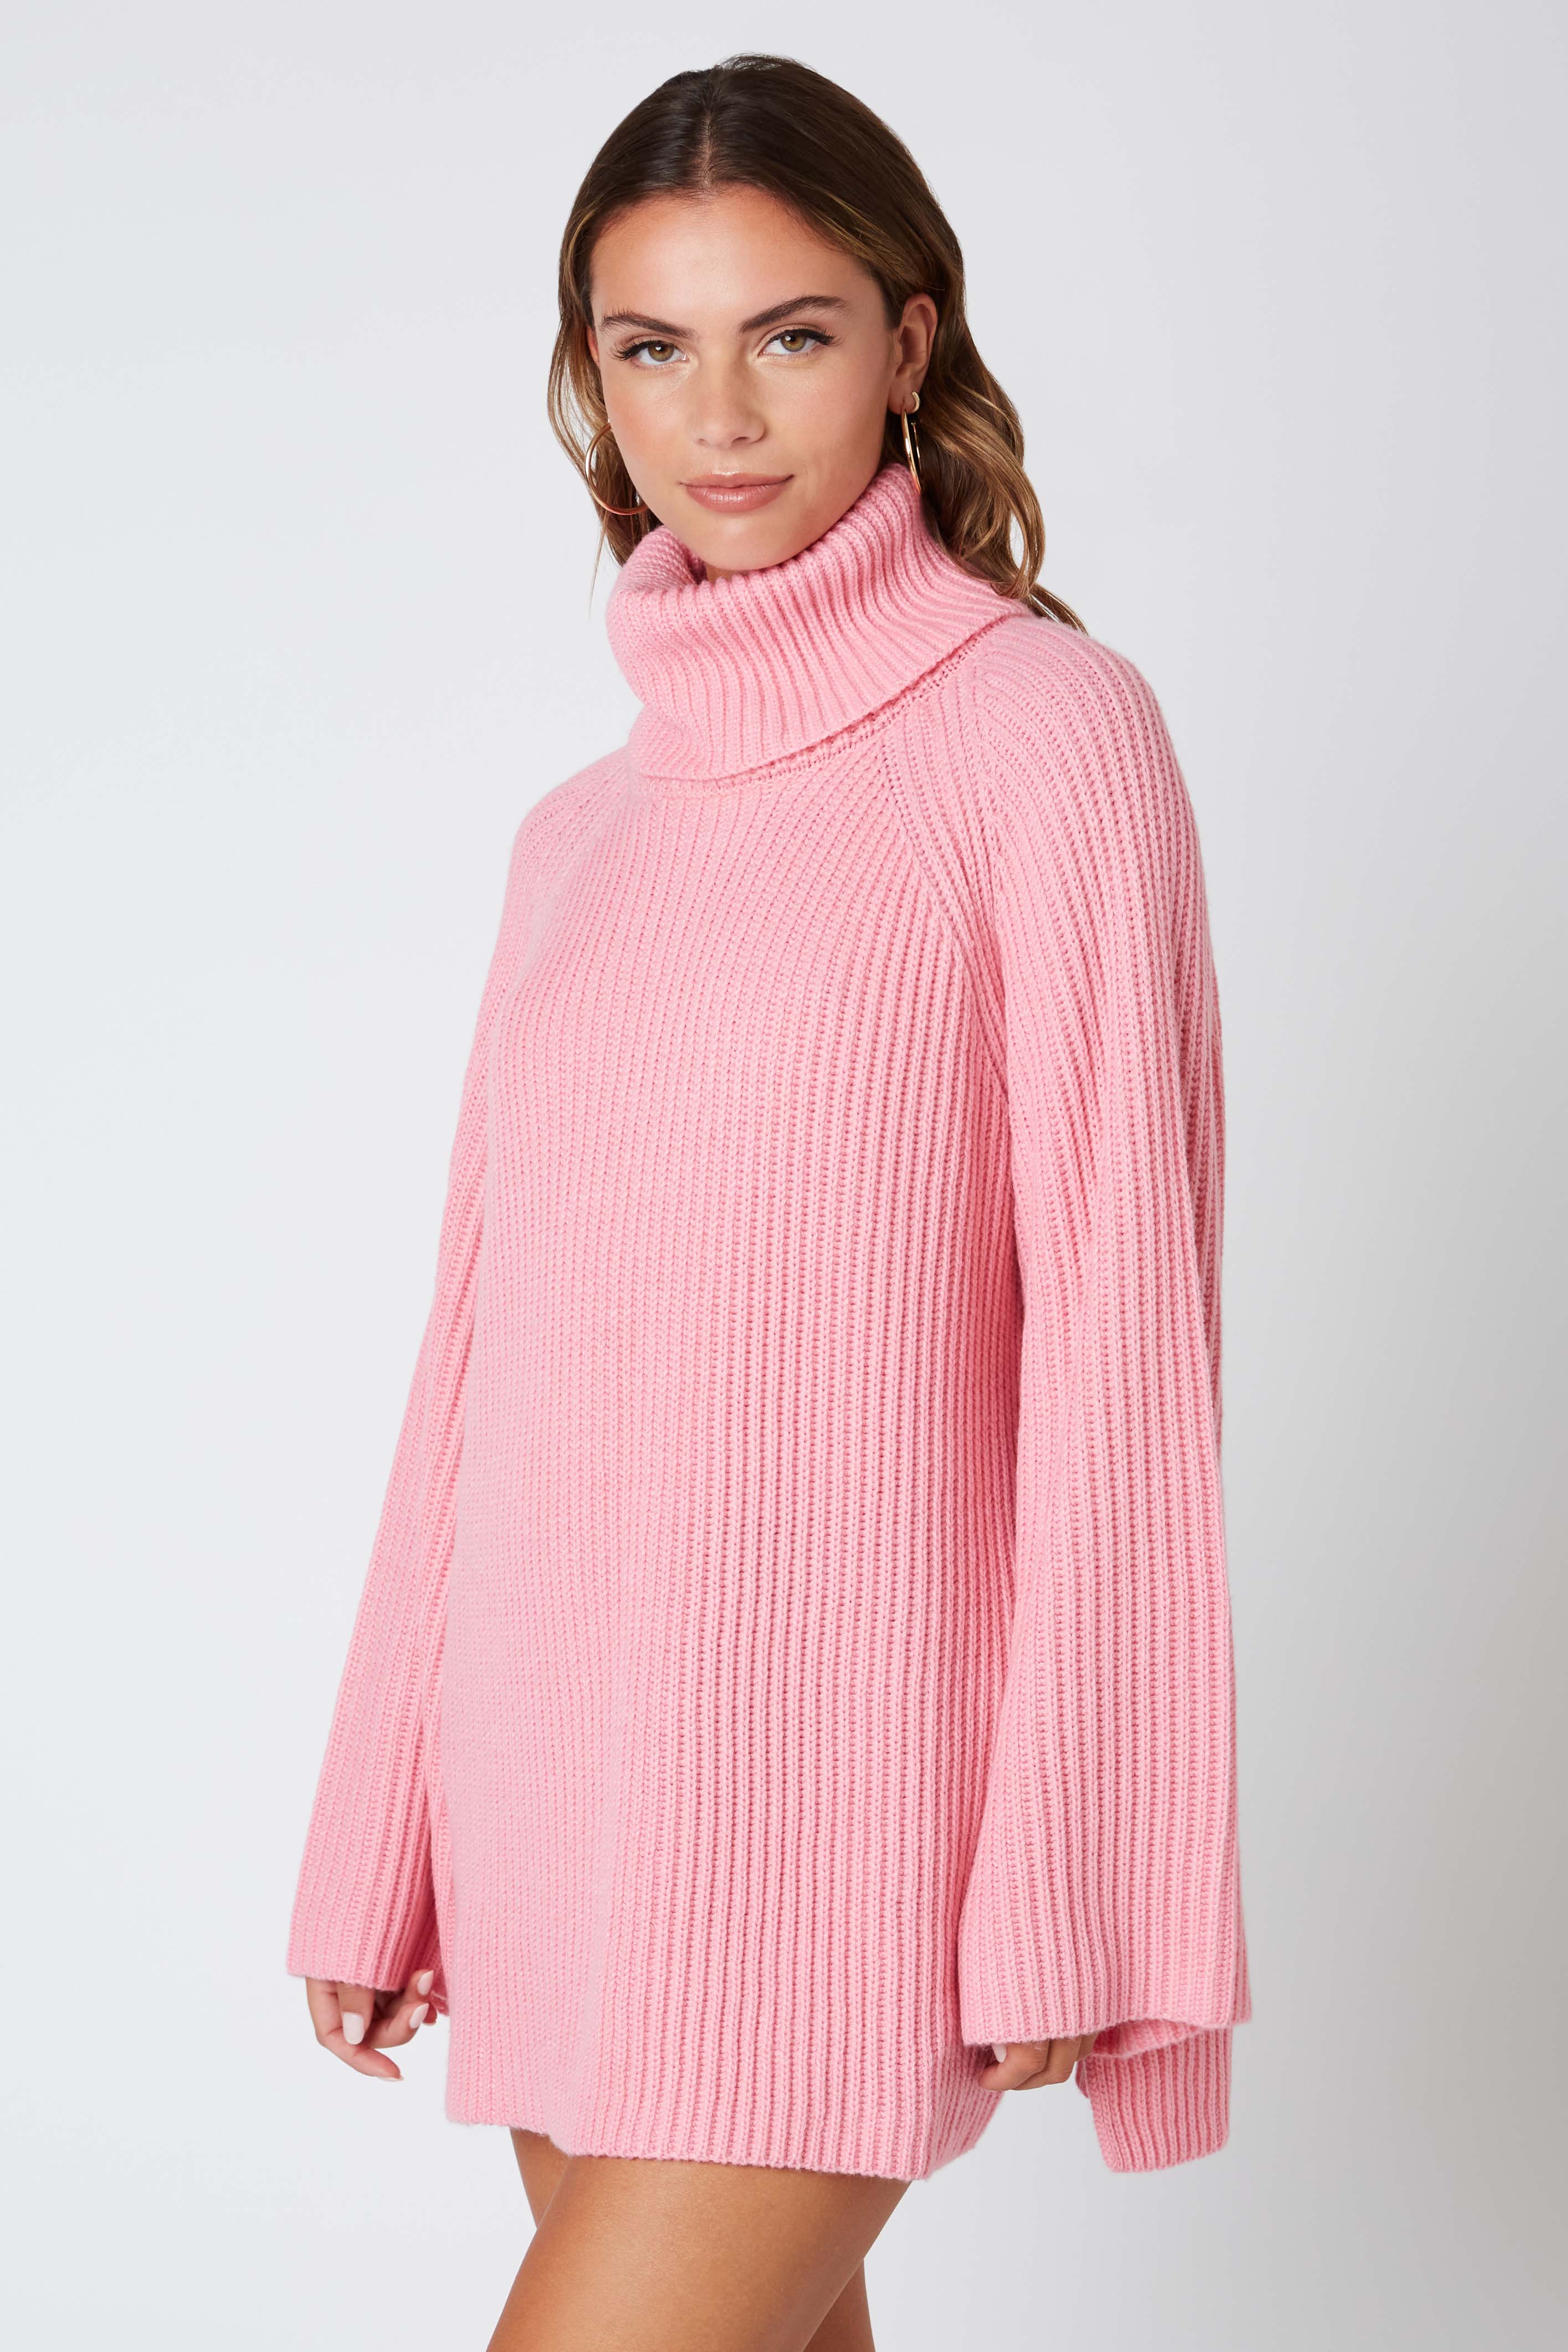 Oversized Turtleneck Sweater in Pink Side View